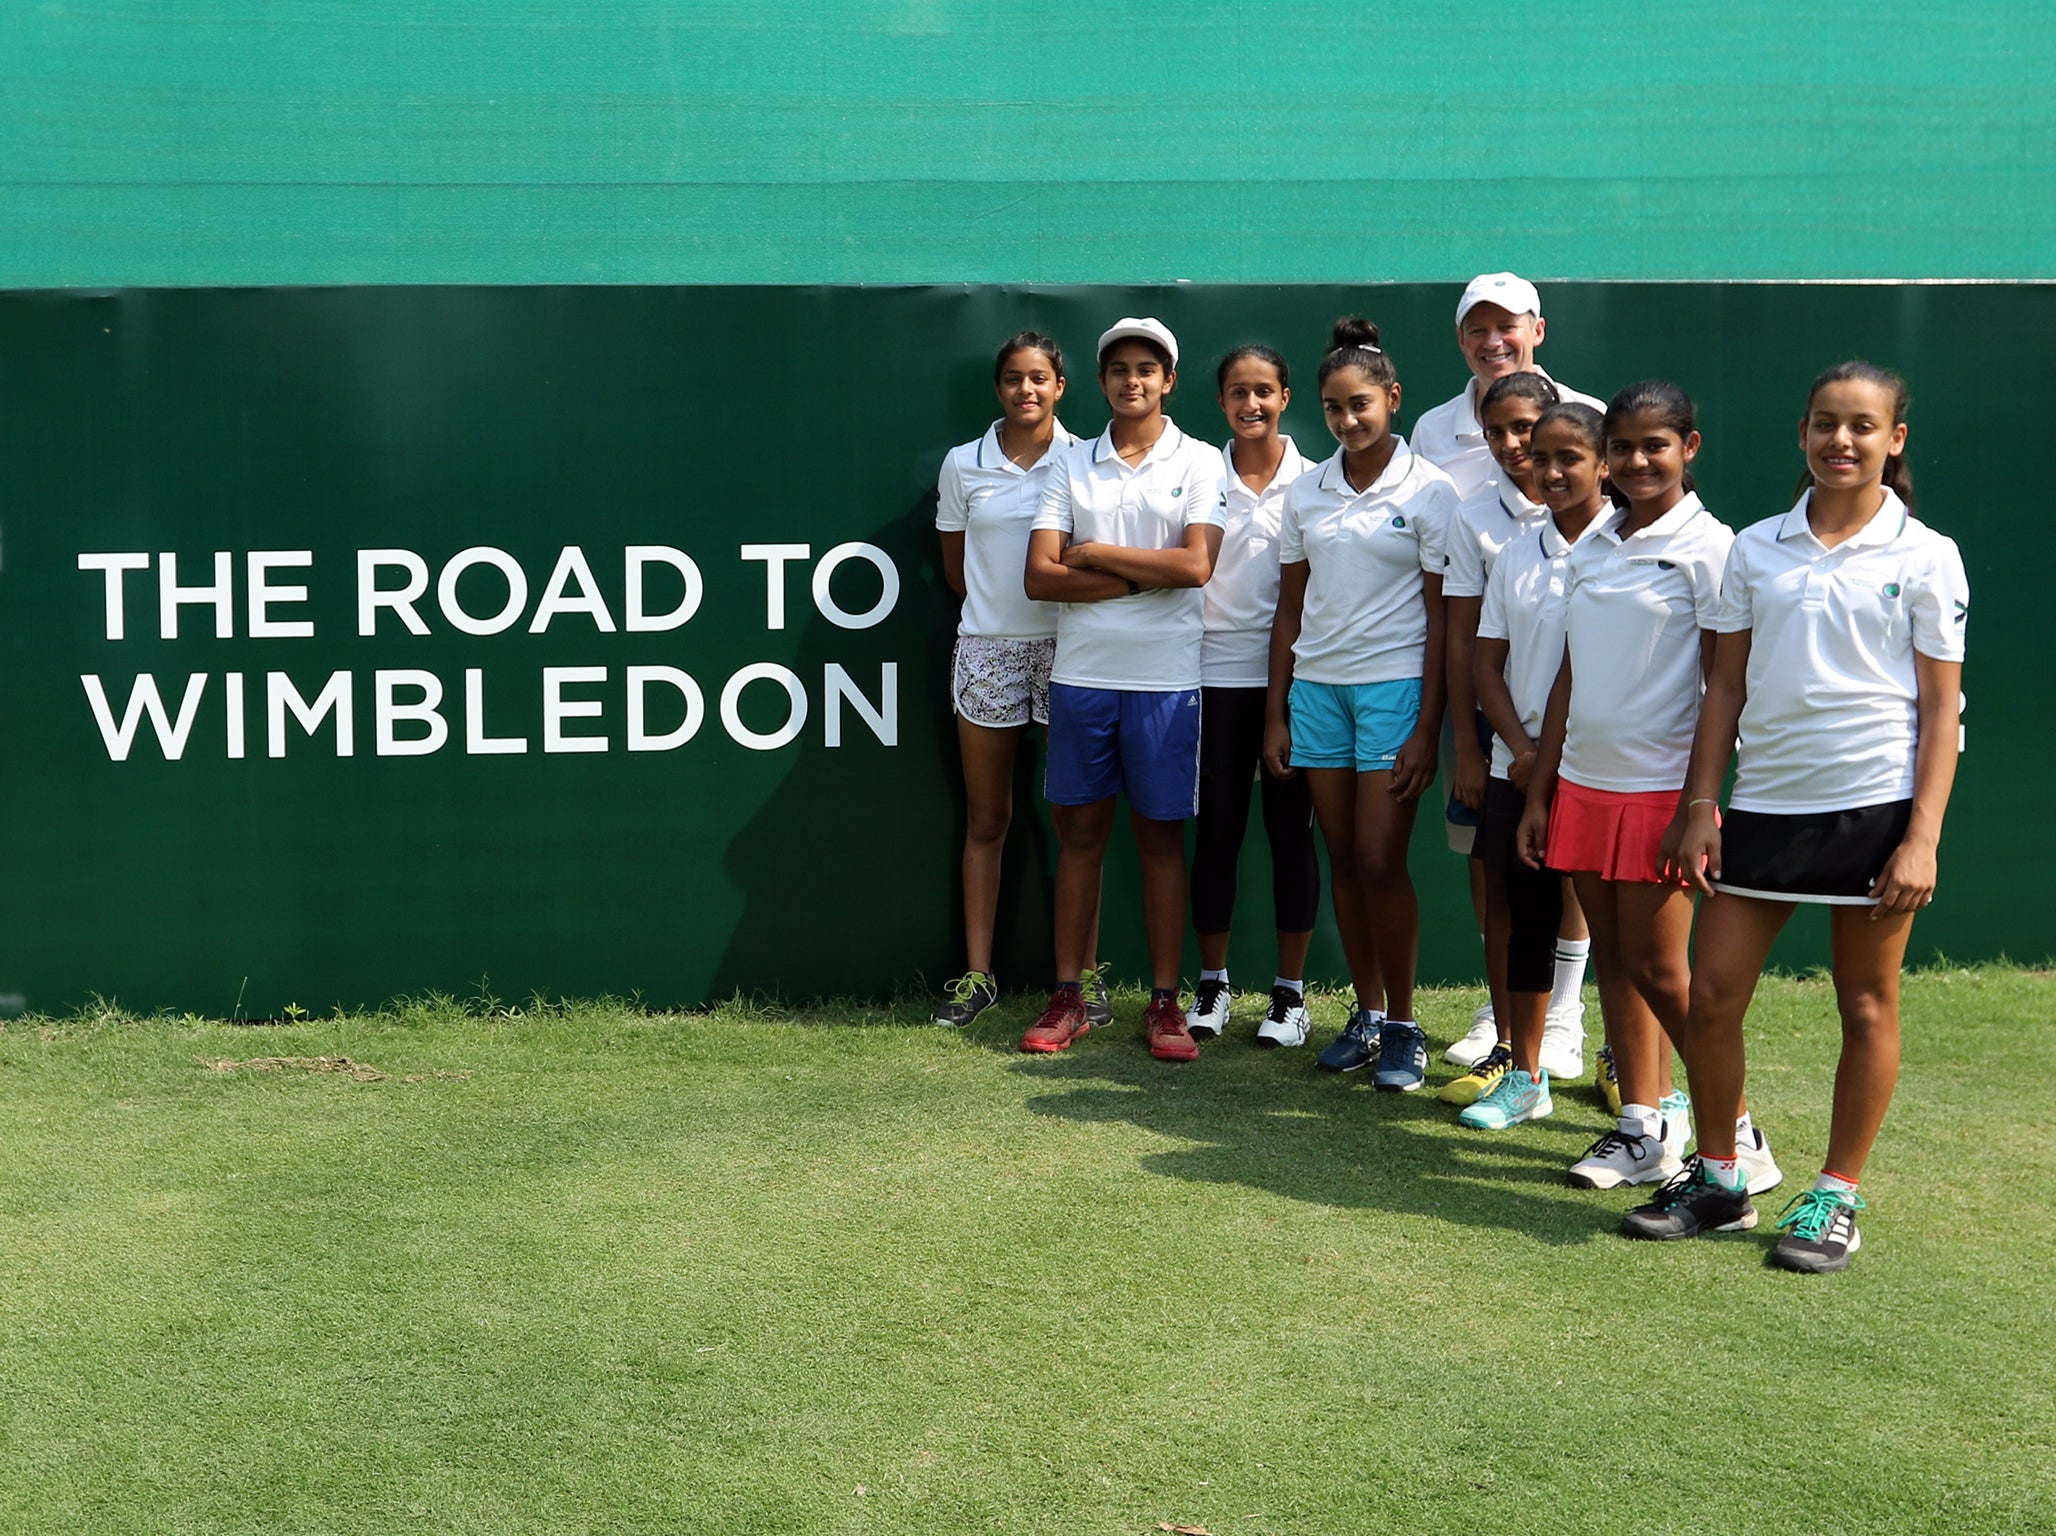 Some of the Road to Wimbledon competitors